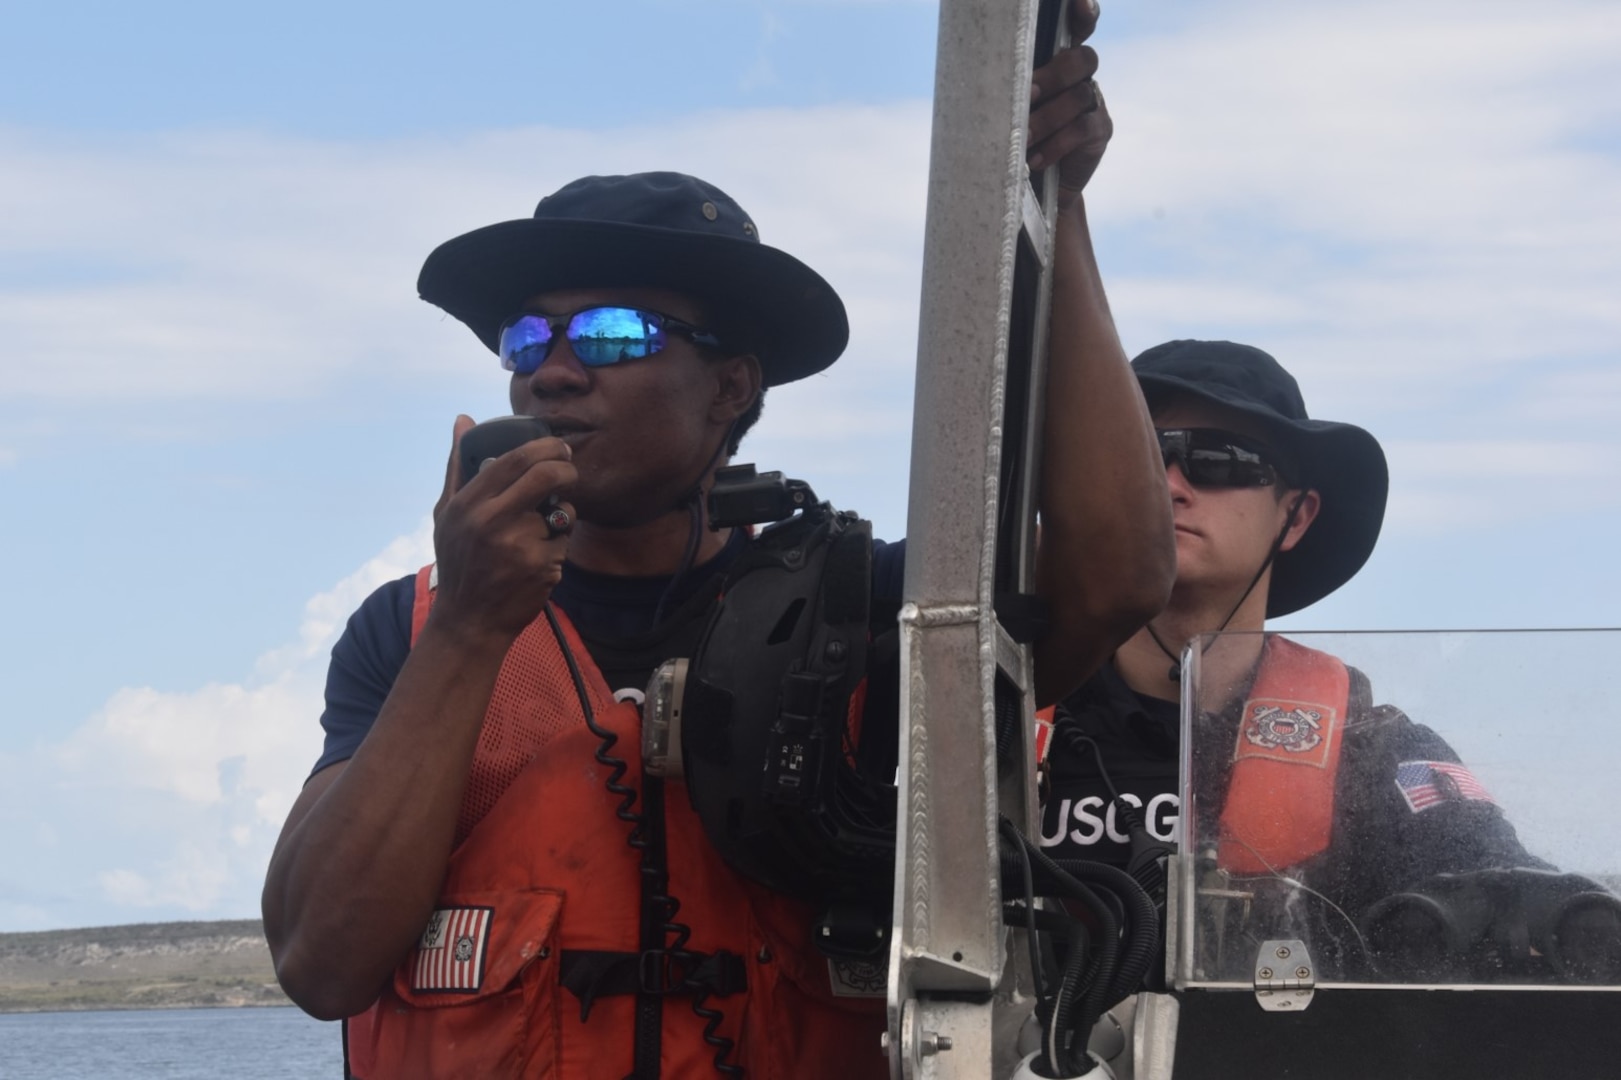 Haitian Coast Guard Officer Josue Philogene addresses migrants alongside the USCGC Campbell (WMEC 909) crew to deter migrant vessel ventures at sea, April 18, 2023. While underway in the Seventh Coast Guard District’s area of responsibility, Campbell’s crew conducted maritime safety and security missions while working to detect, deter and intercept unsafe and illegal maritime migration ventures bound for the United States. (U.S. Coast Guard photo by Petty Officer 2nd Class Stephen Touchton)